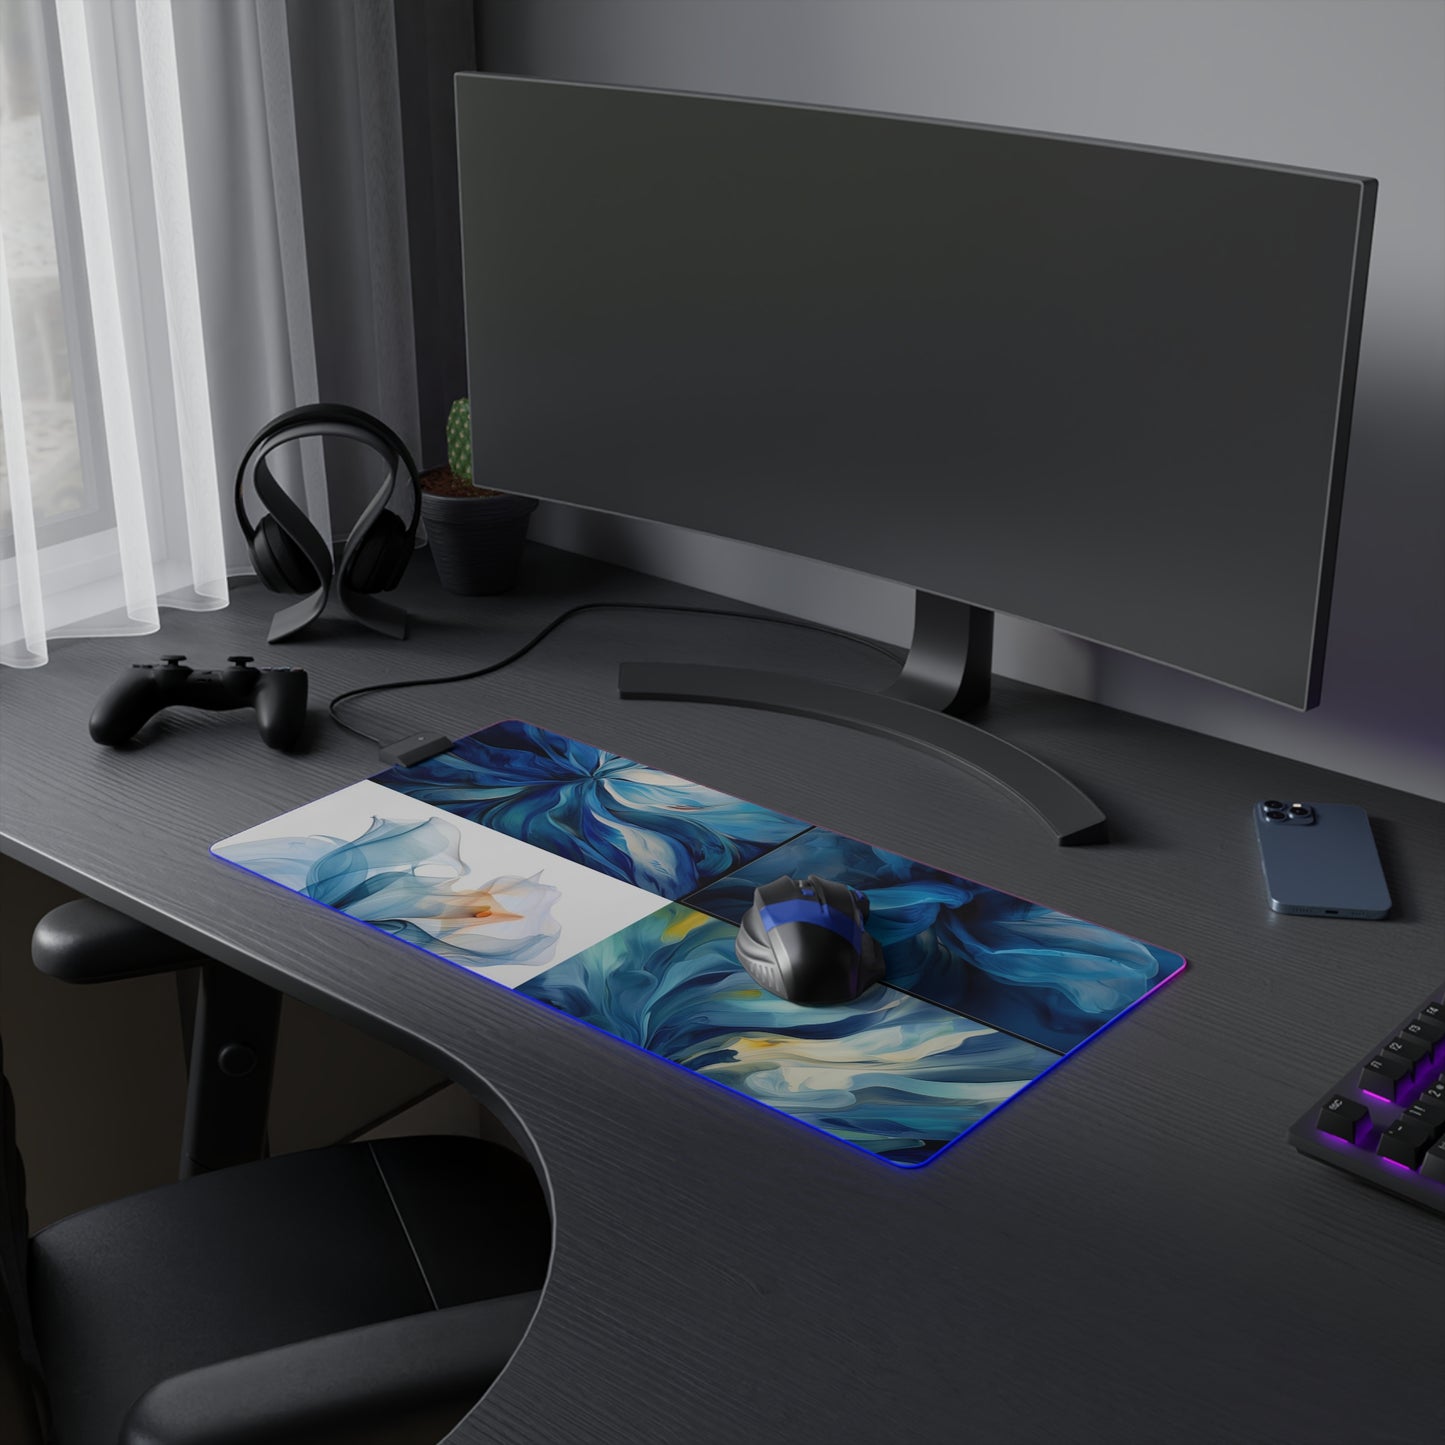 LED Gaming Mouse Pad Blue Tluip Abstract 5